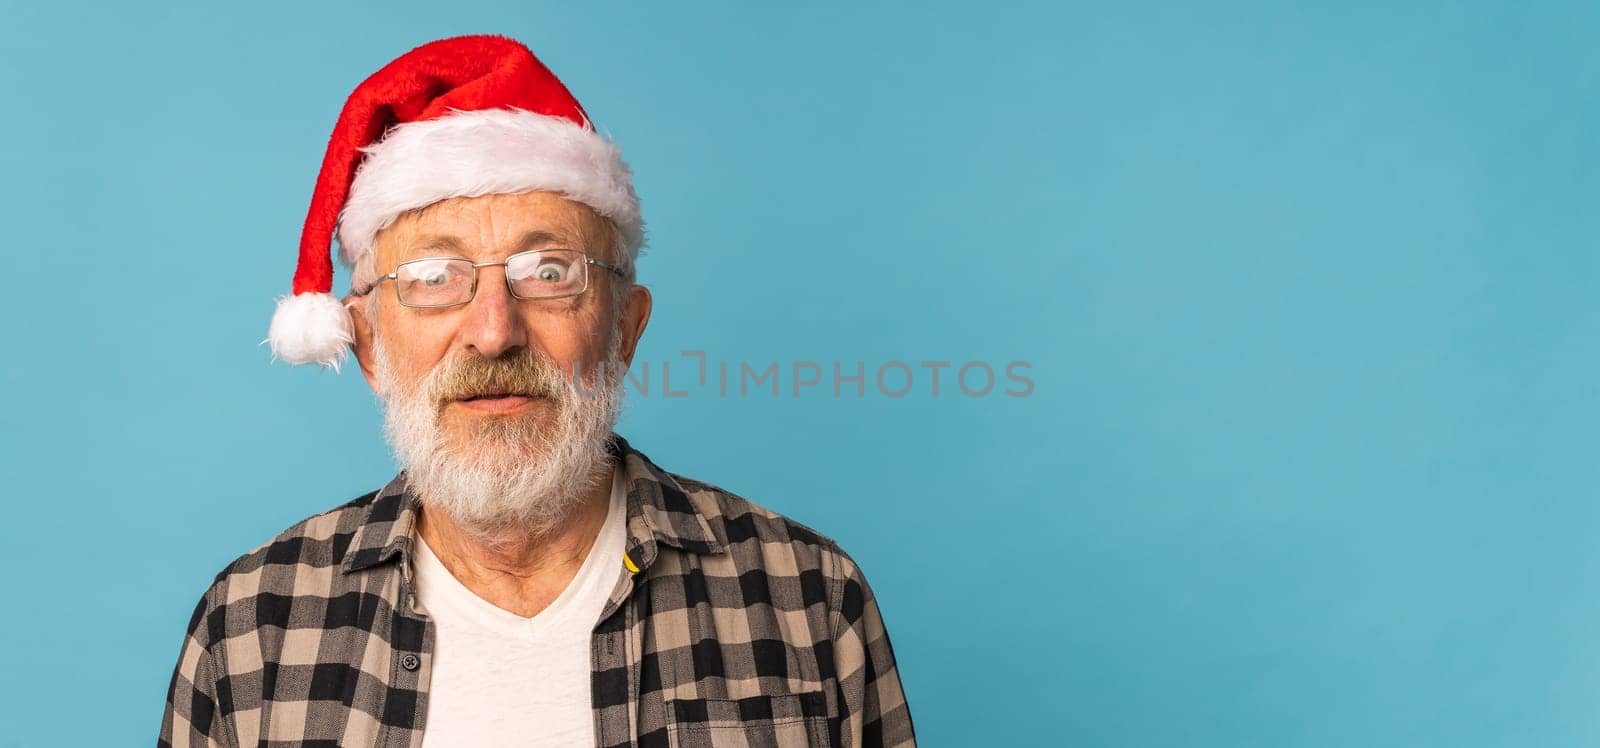 Banner portrait of Surprised Santa Claus on blue background with copy space - emotions and winter holidays concept by Satura86